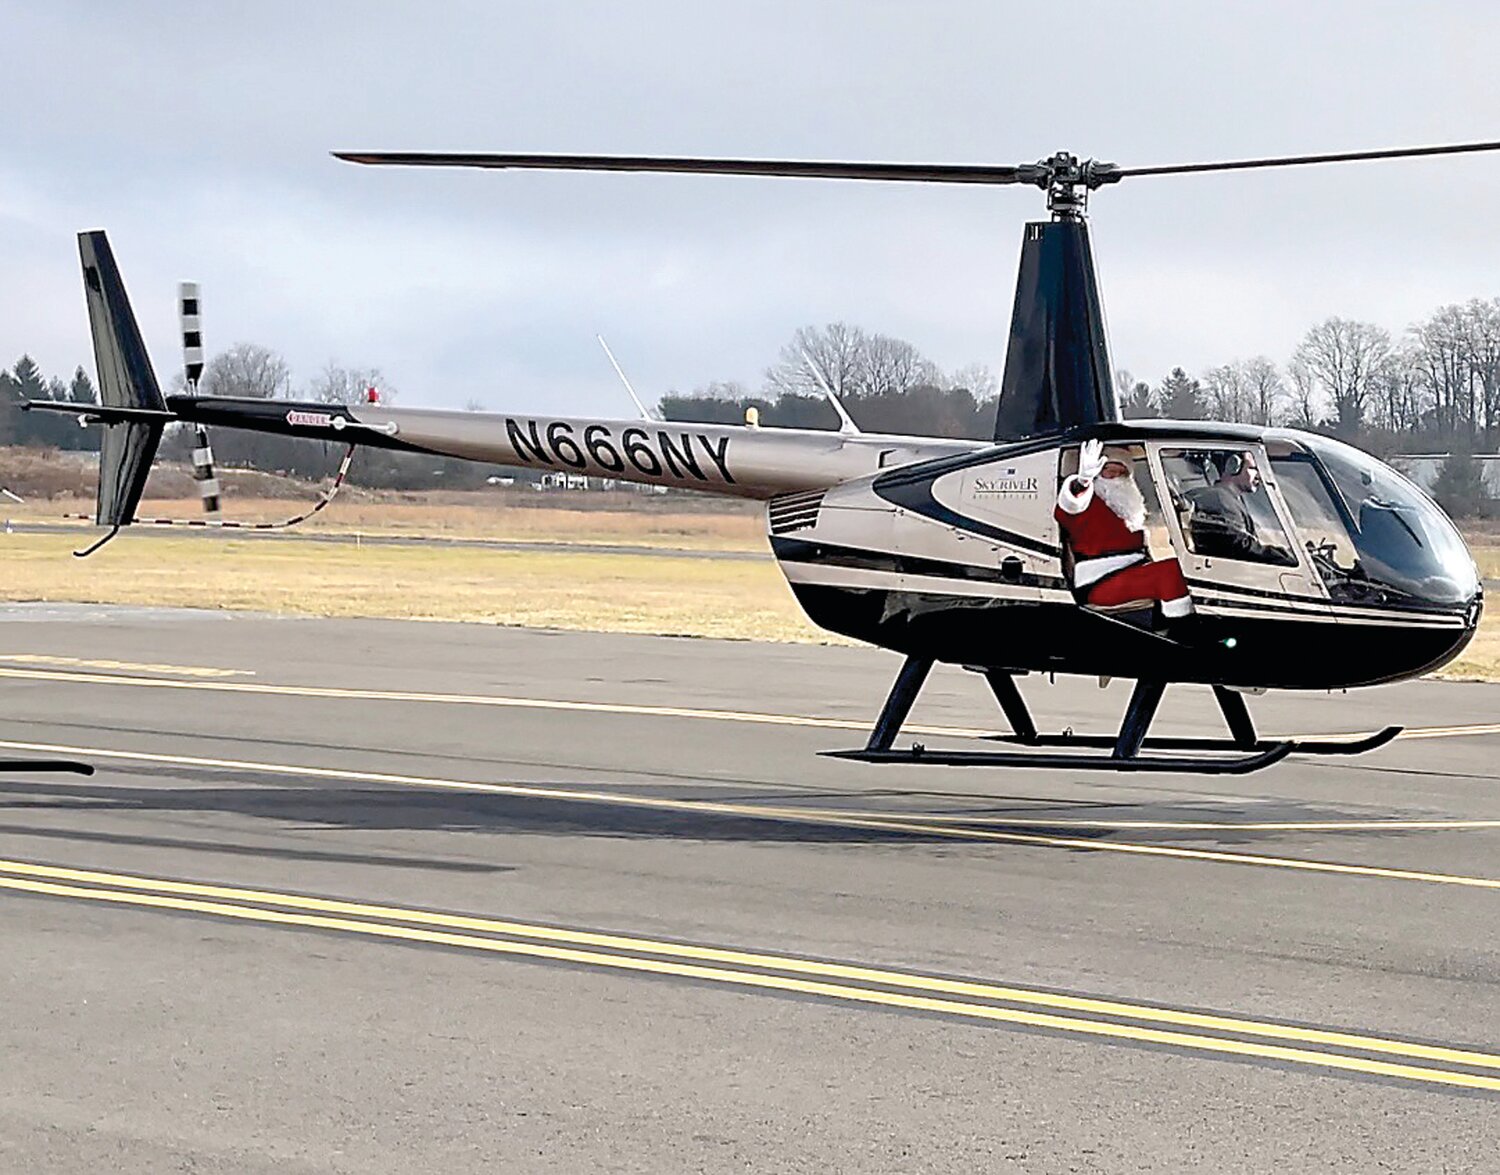 A helicopter carrying Santa Claus touches down at Doylestown Airport on Dec. 9 to distribute gifts. Leading Edge Aviation of Buckingham has hosted Santa’s arrival for more than 20 years.